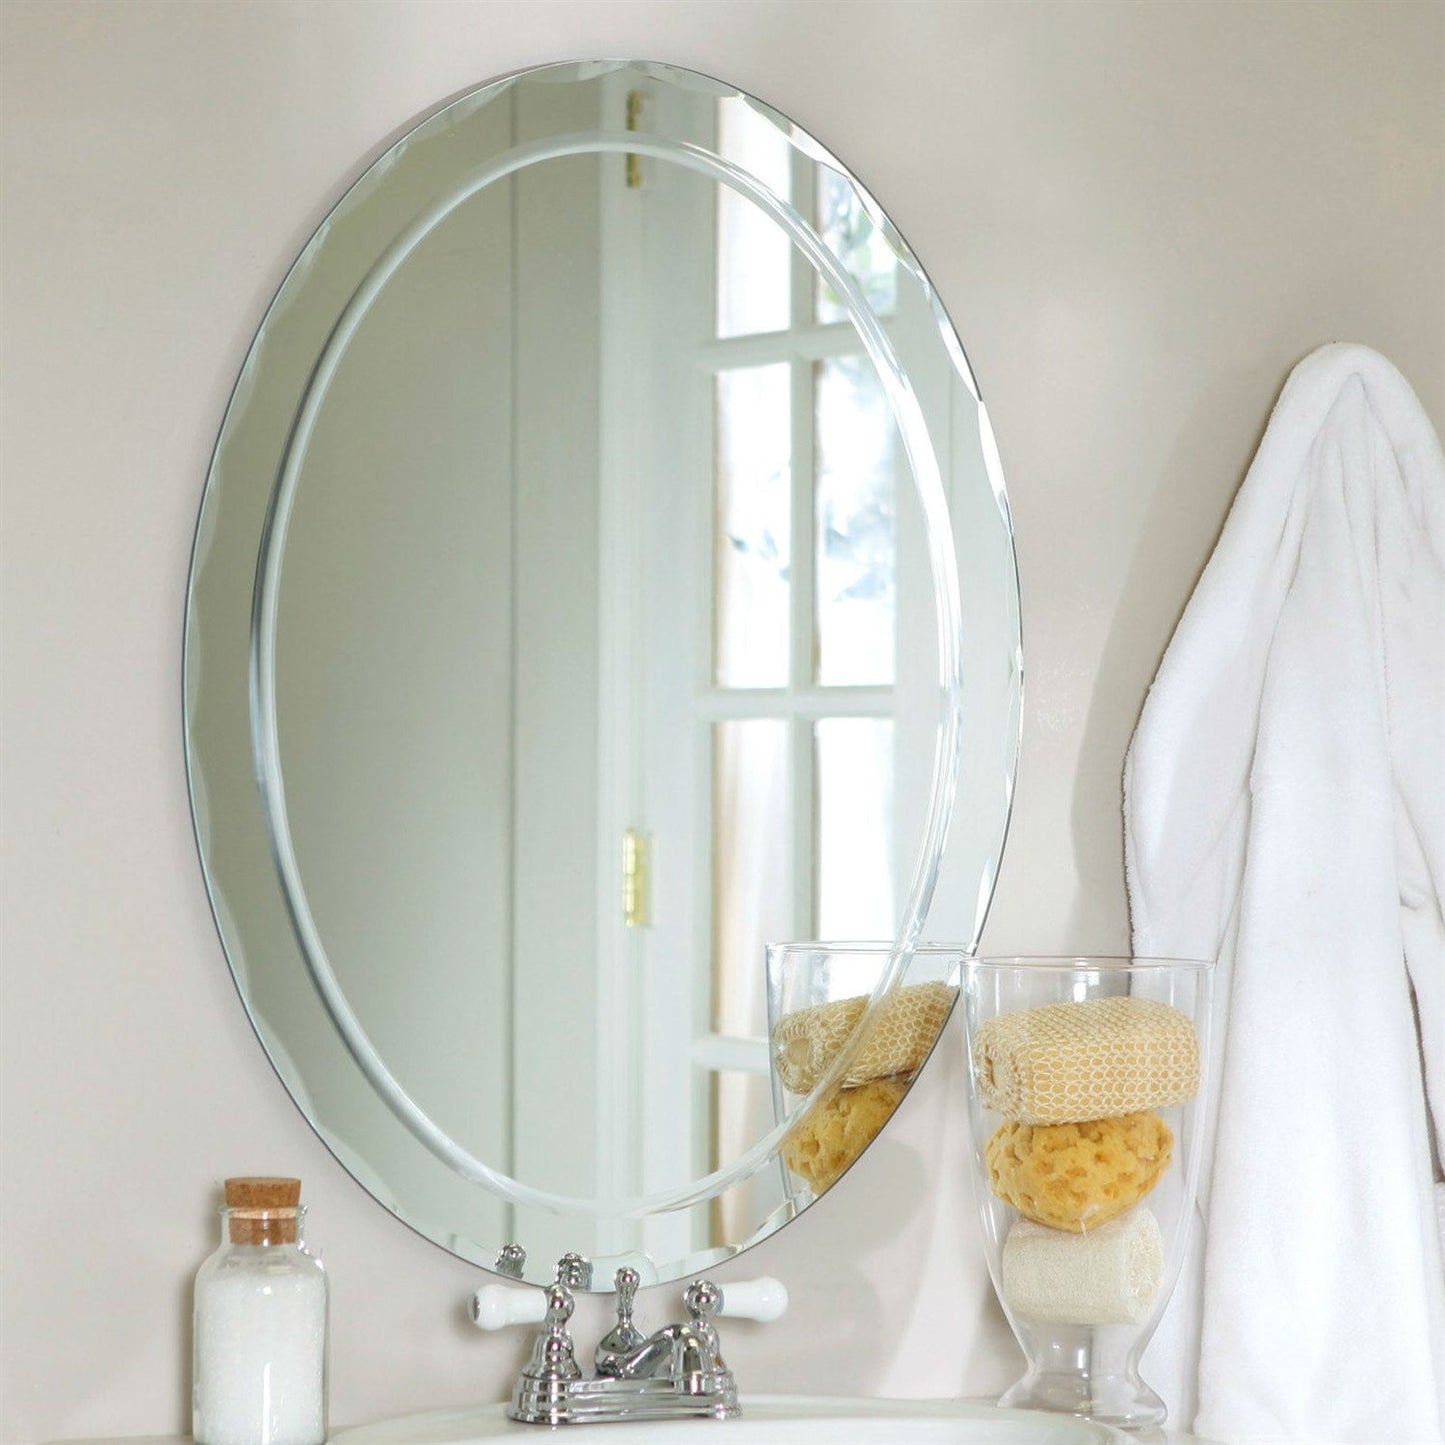 Accents > Mirrors - Oval Frameless Bathroom Vanity Wall Mirror With Beveled Edge Scallop Border